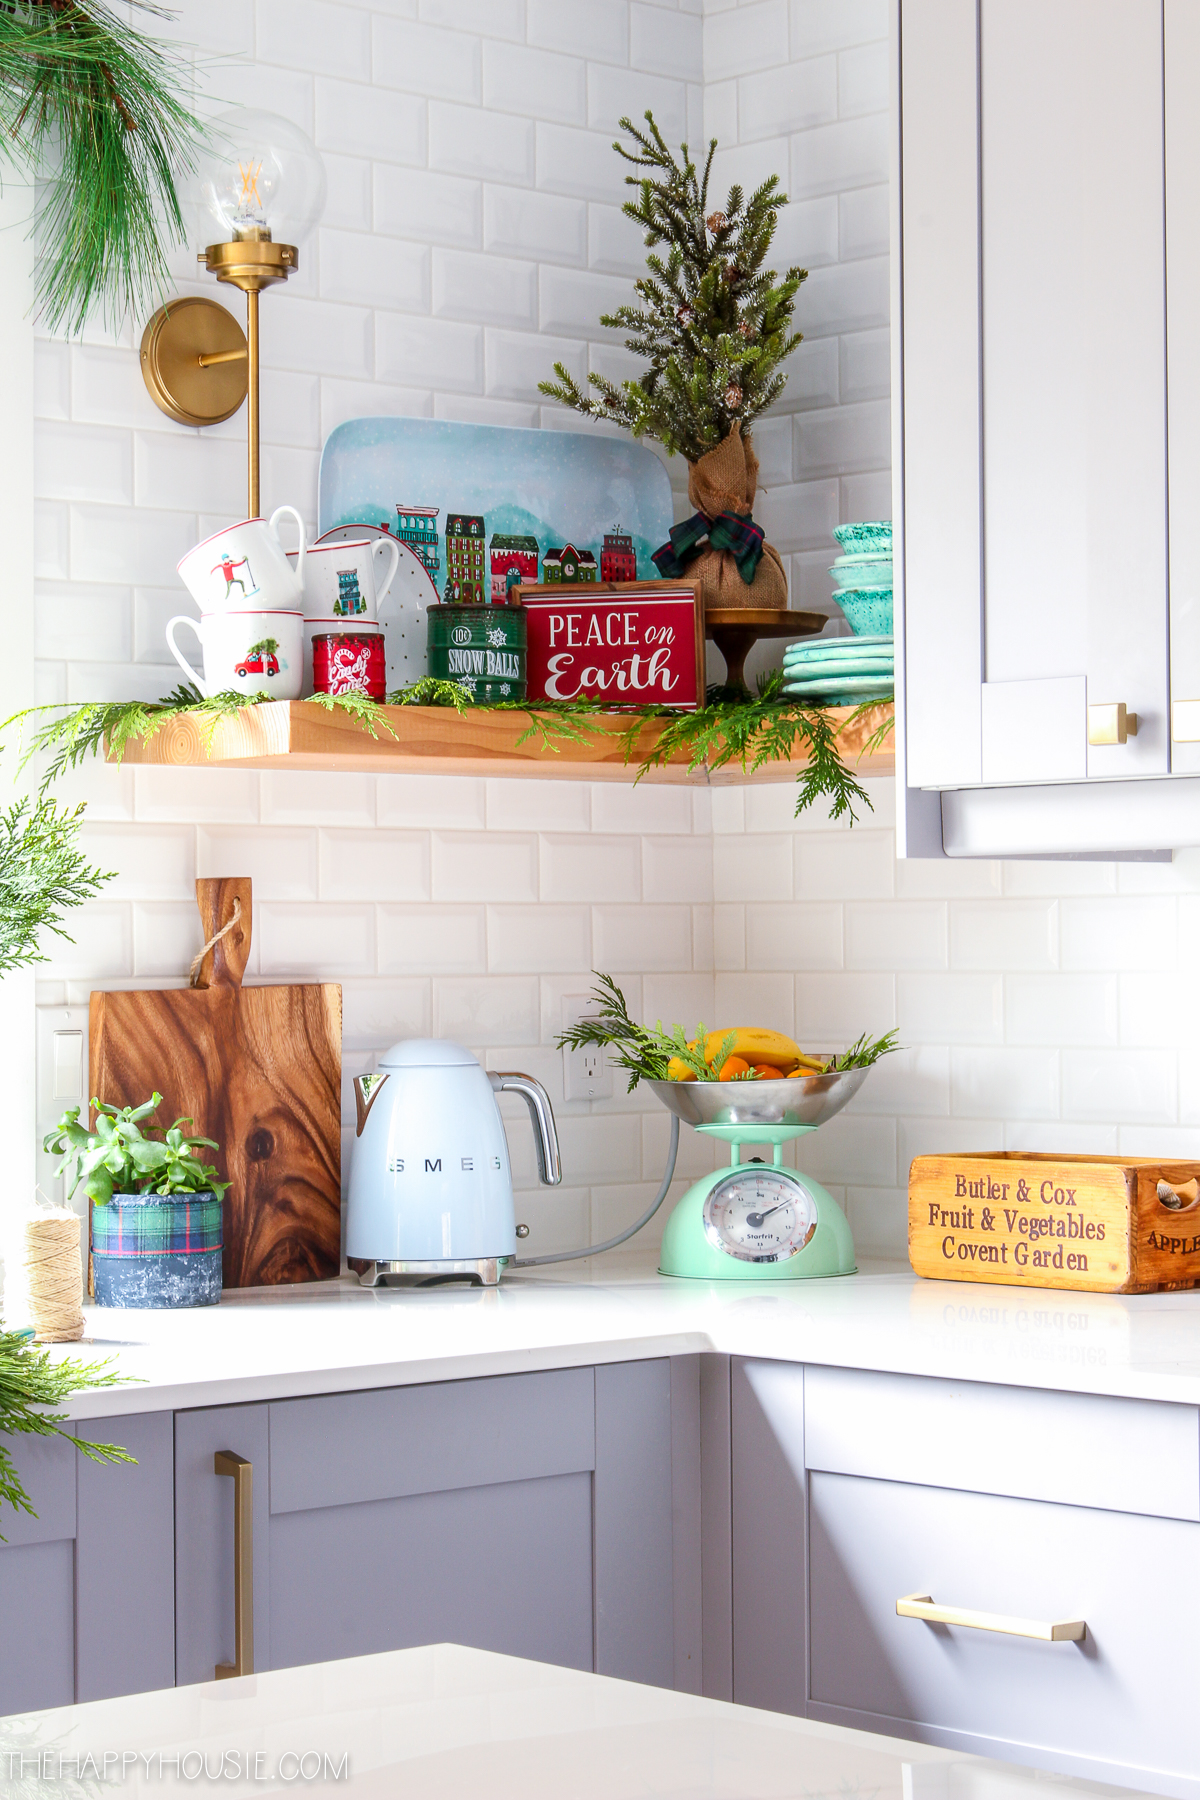 There is another open corner shelf in the kitchen with holiday decor.